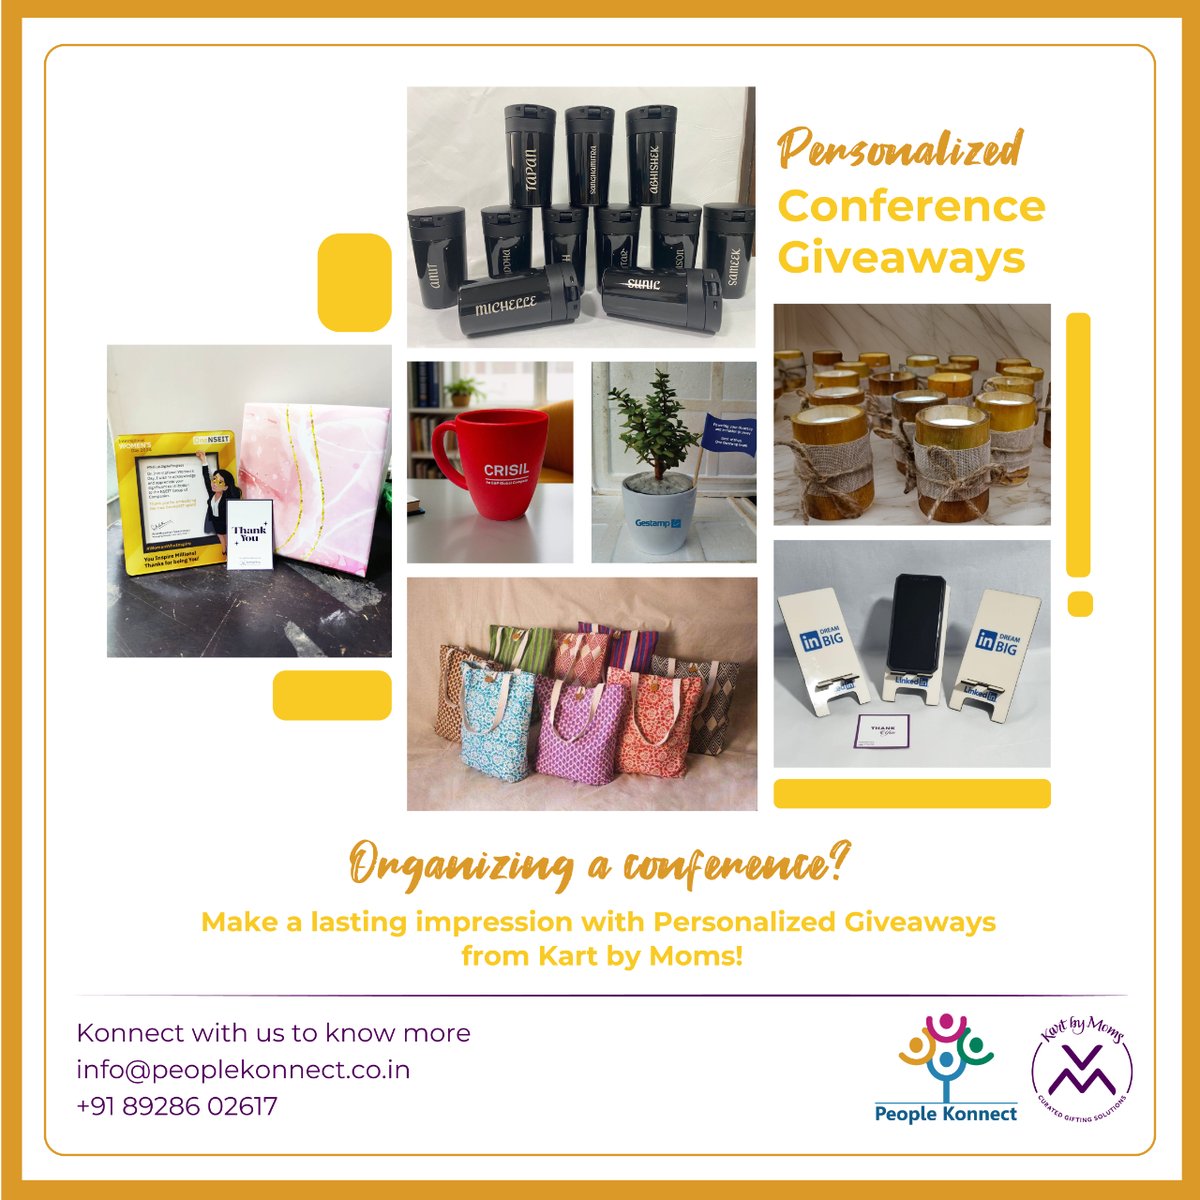 Conference giveaways that leave a lasting impression with personalized gifts from Kart by Moms!✨

#conferencegiveaway #conferencegifts #personalizedgifts #clientgifting #clientgiftideas #eventgifting #corporategifts #corporategiftings #corporategiftideas #kartbymoms